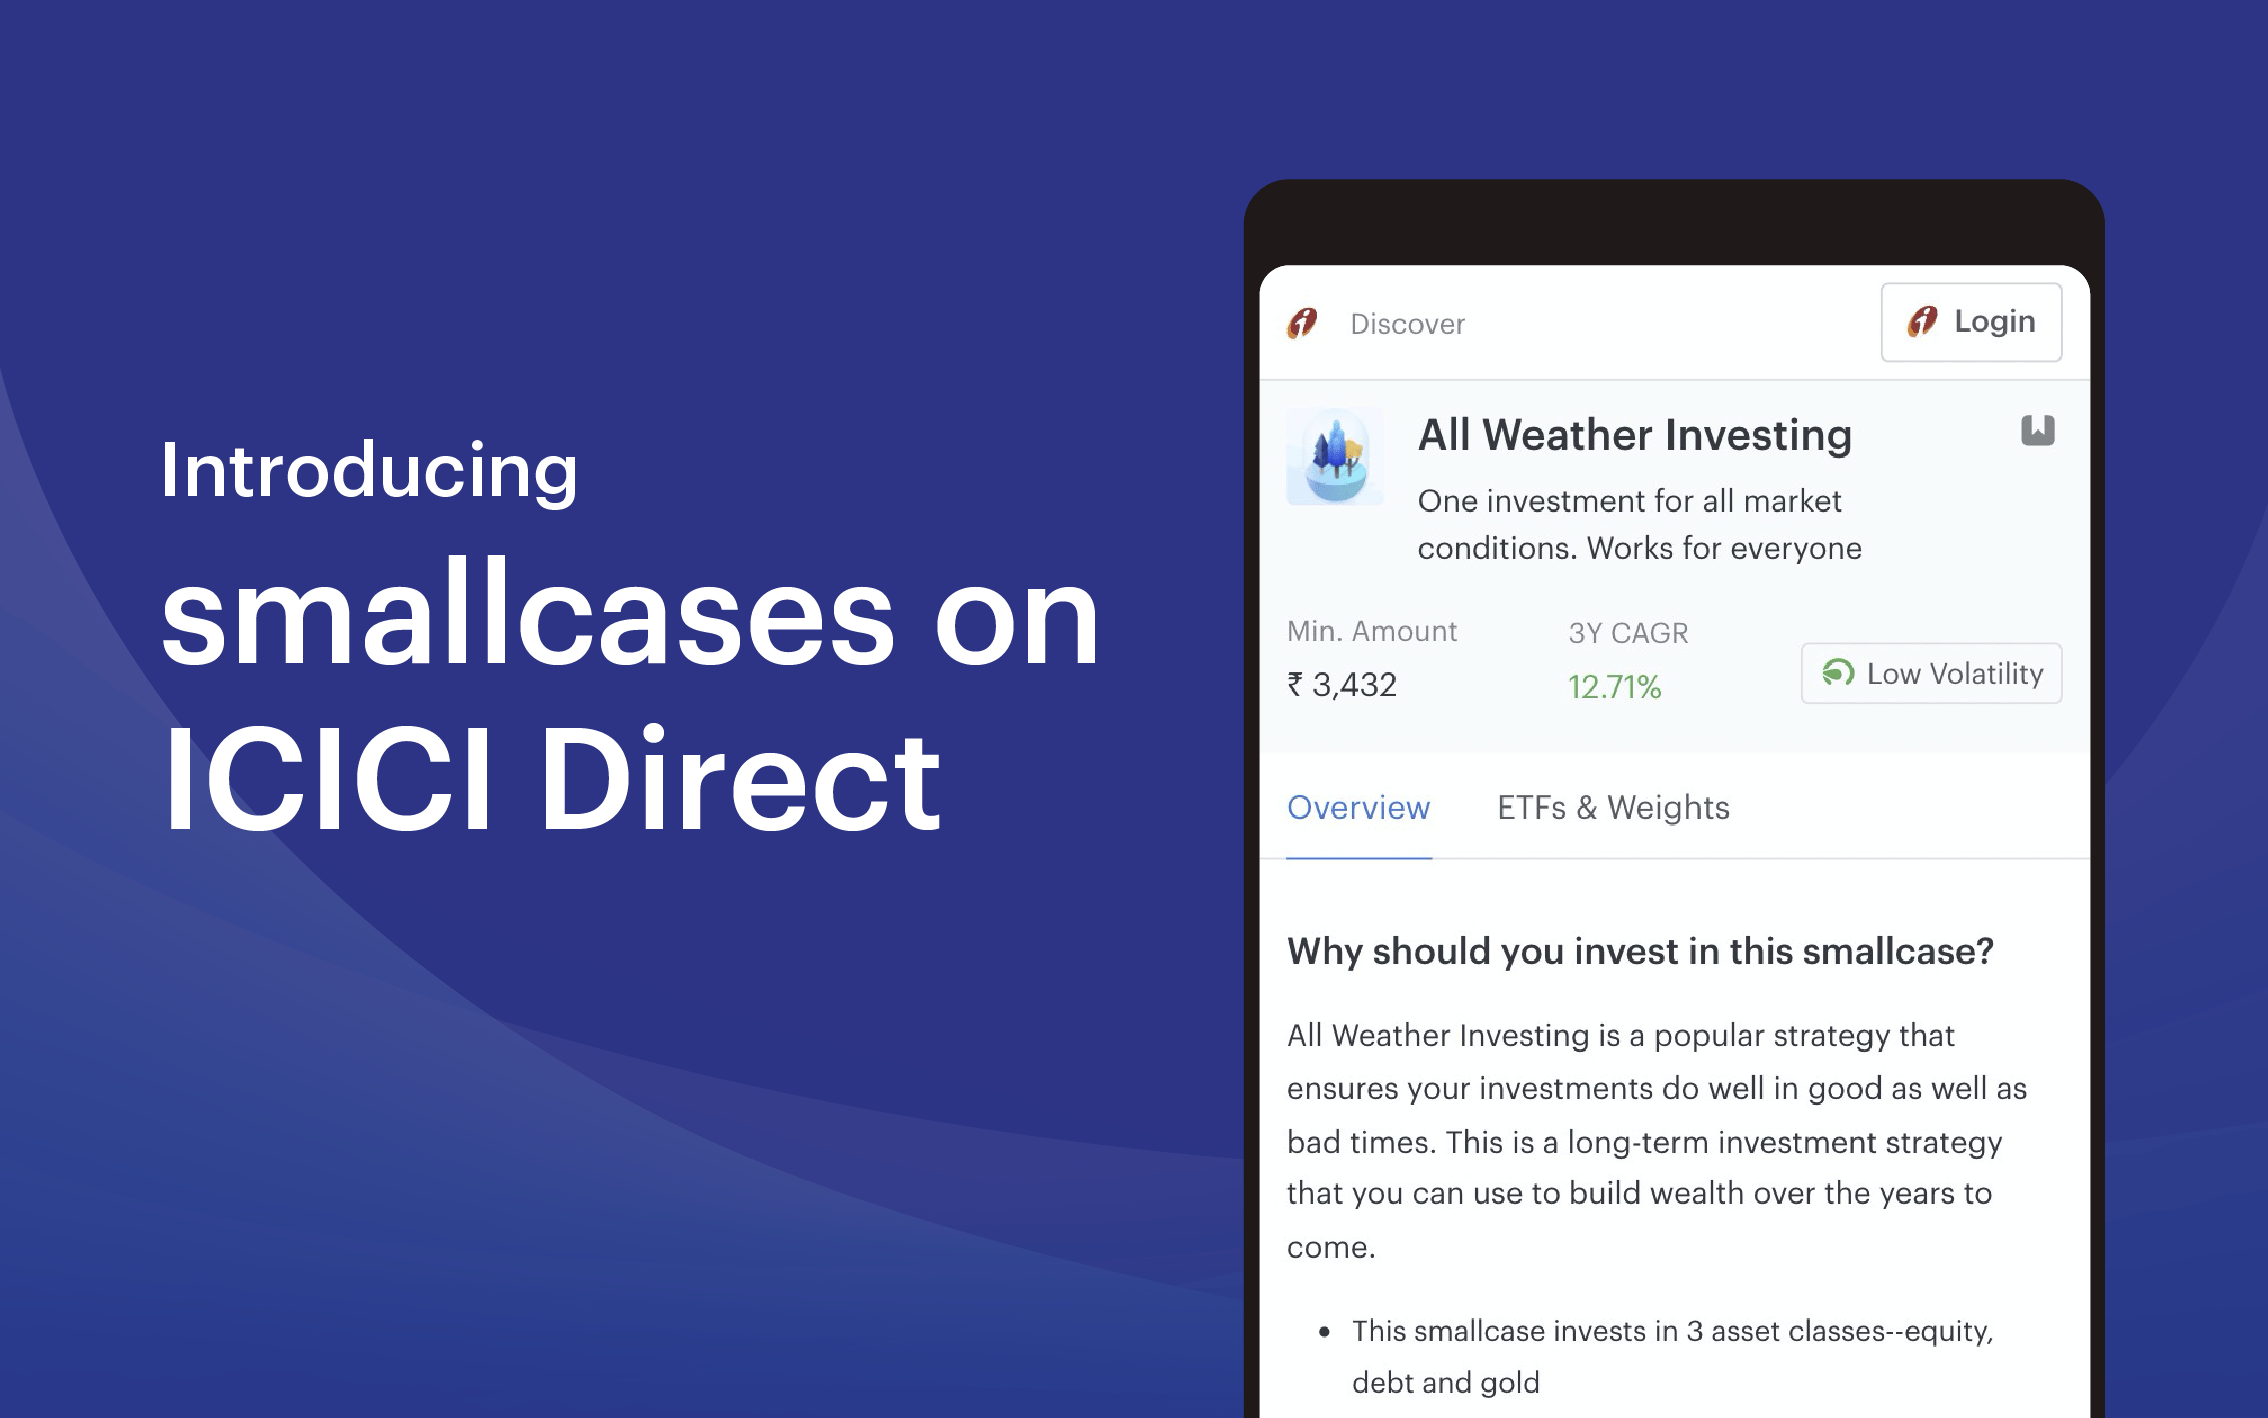 Introducing smallcases on ICICIdirect